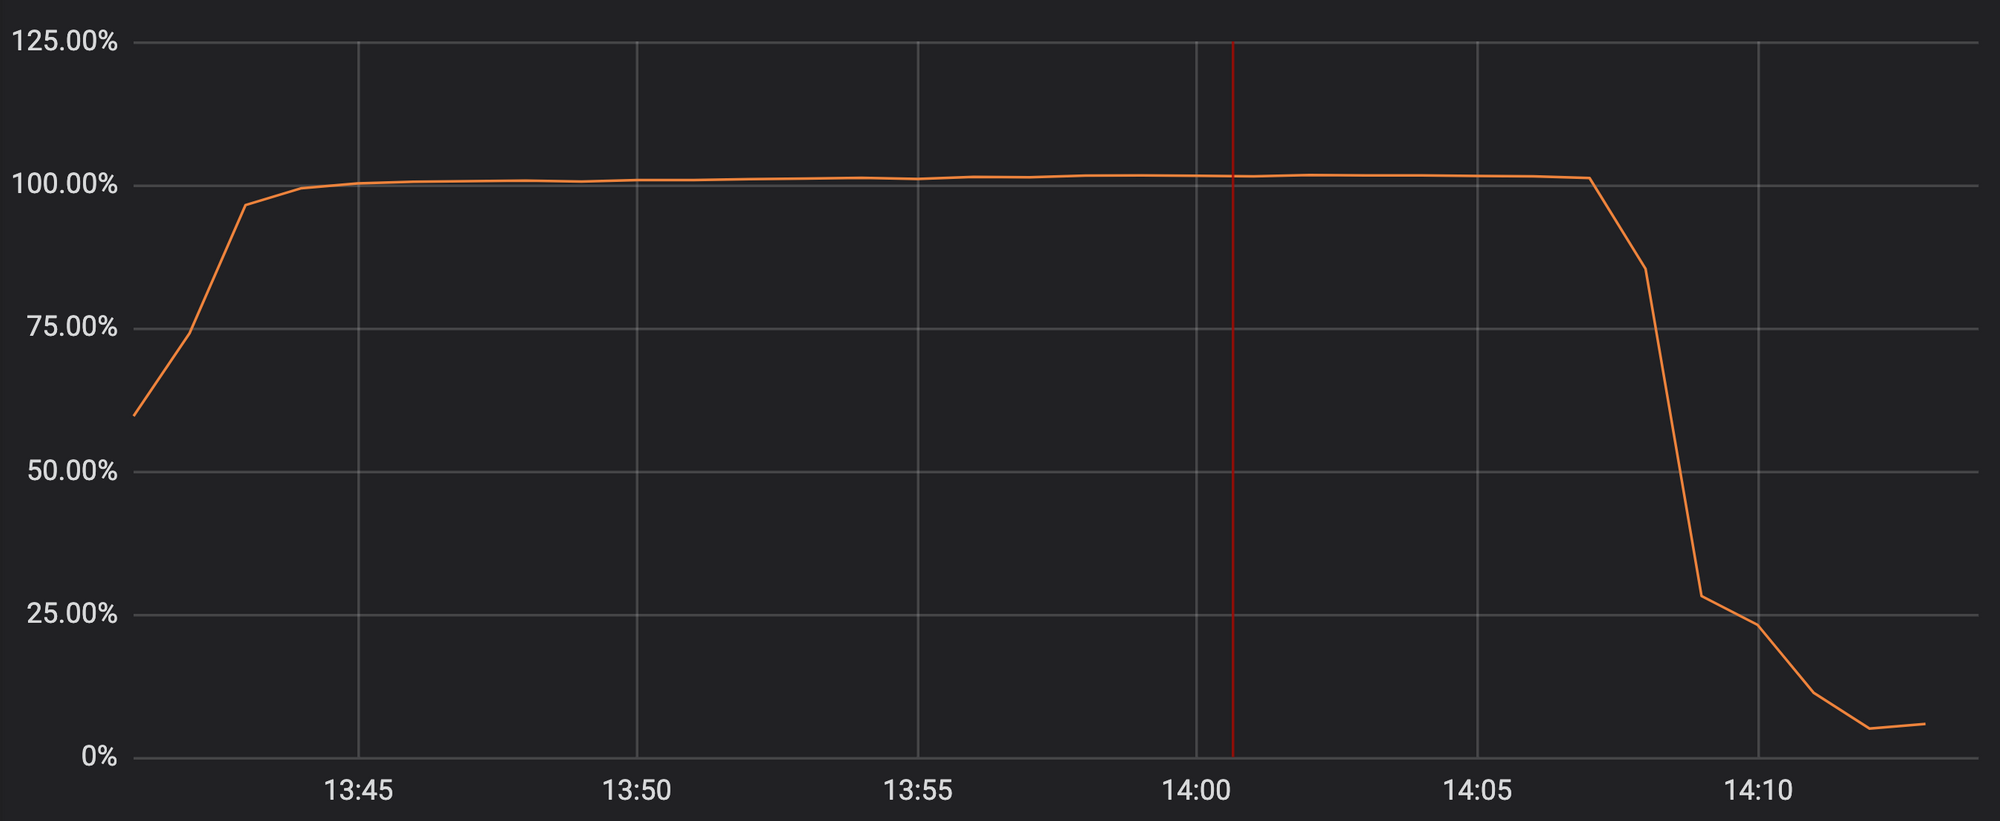 CPU utilization in one of our PoPs during the incident